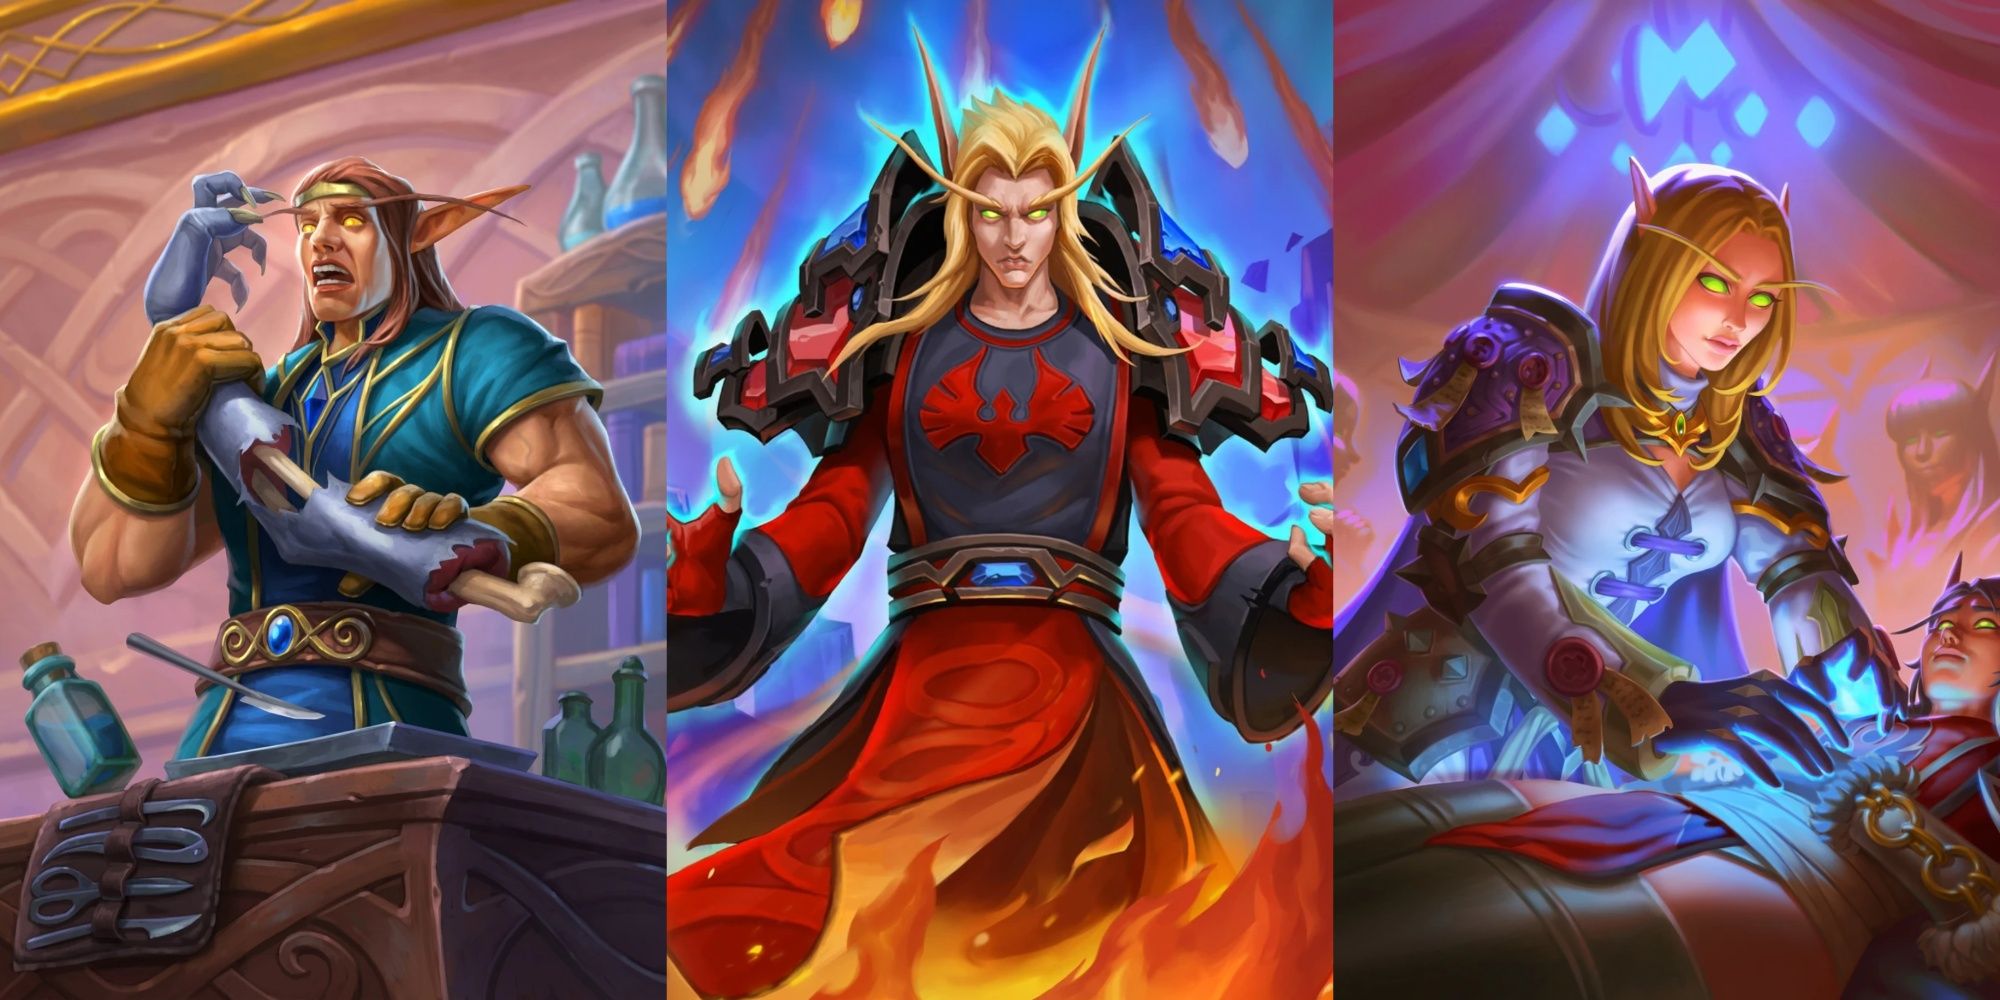 Collage Image of the Coroner, Astalor, the Flamebringer, and Sunfury Clergy card artwork in Hearthstone.